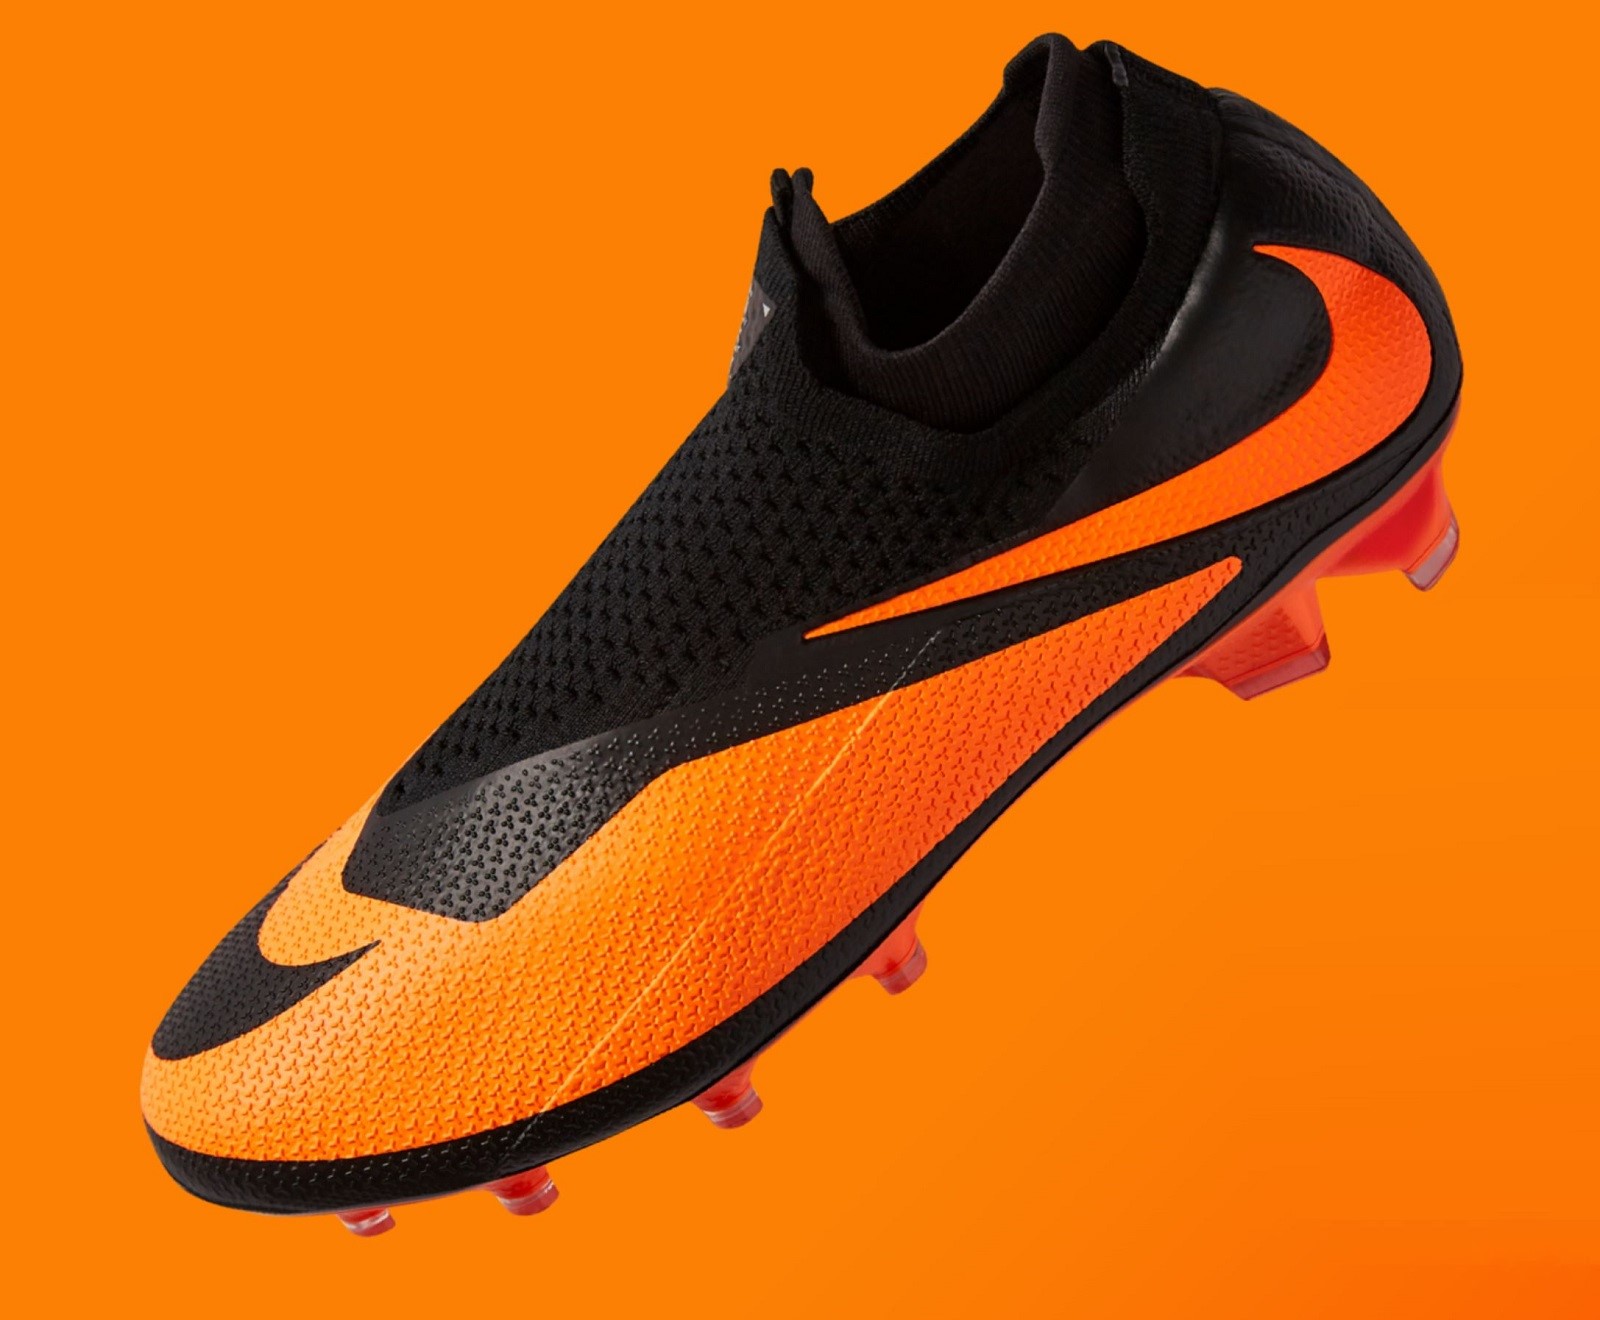 Middle content Arthur new hypervenom 2019, great discount UP TO 89% OFF - statehouse.gov.sl